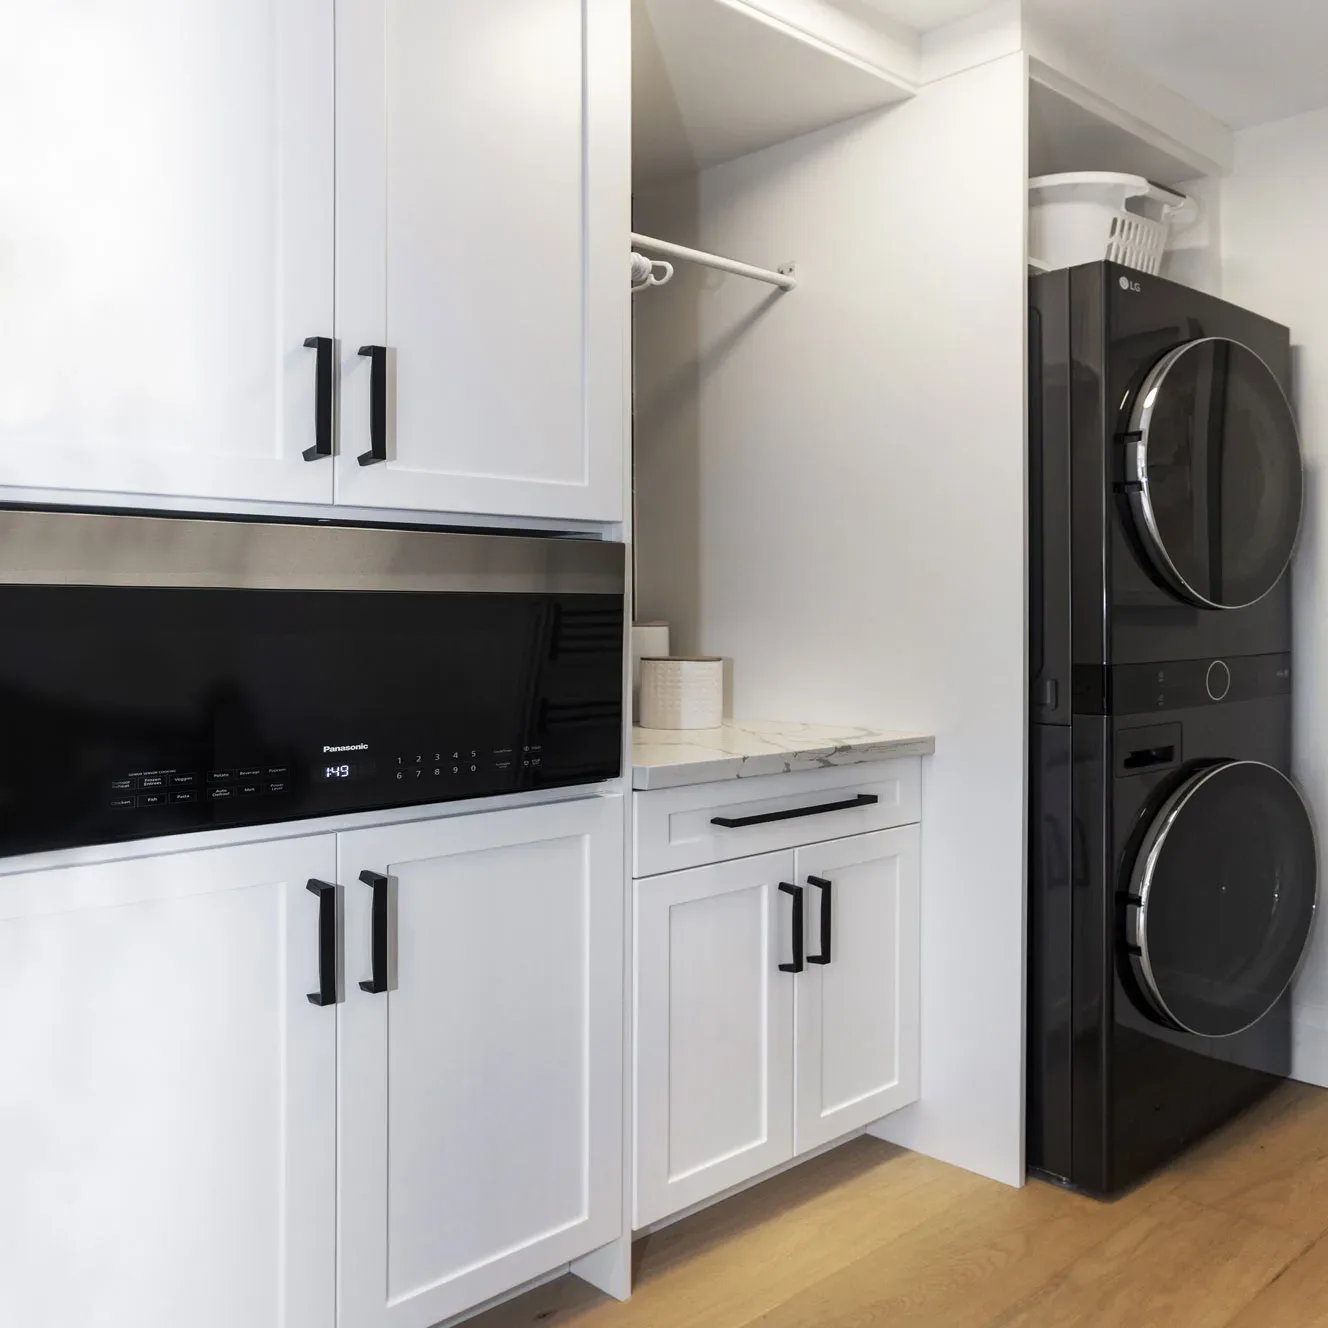 A laundry room with white cabinets trimmed with black handles along with an area to hang clothes and black stackable washer/dryer.